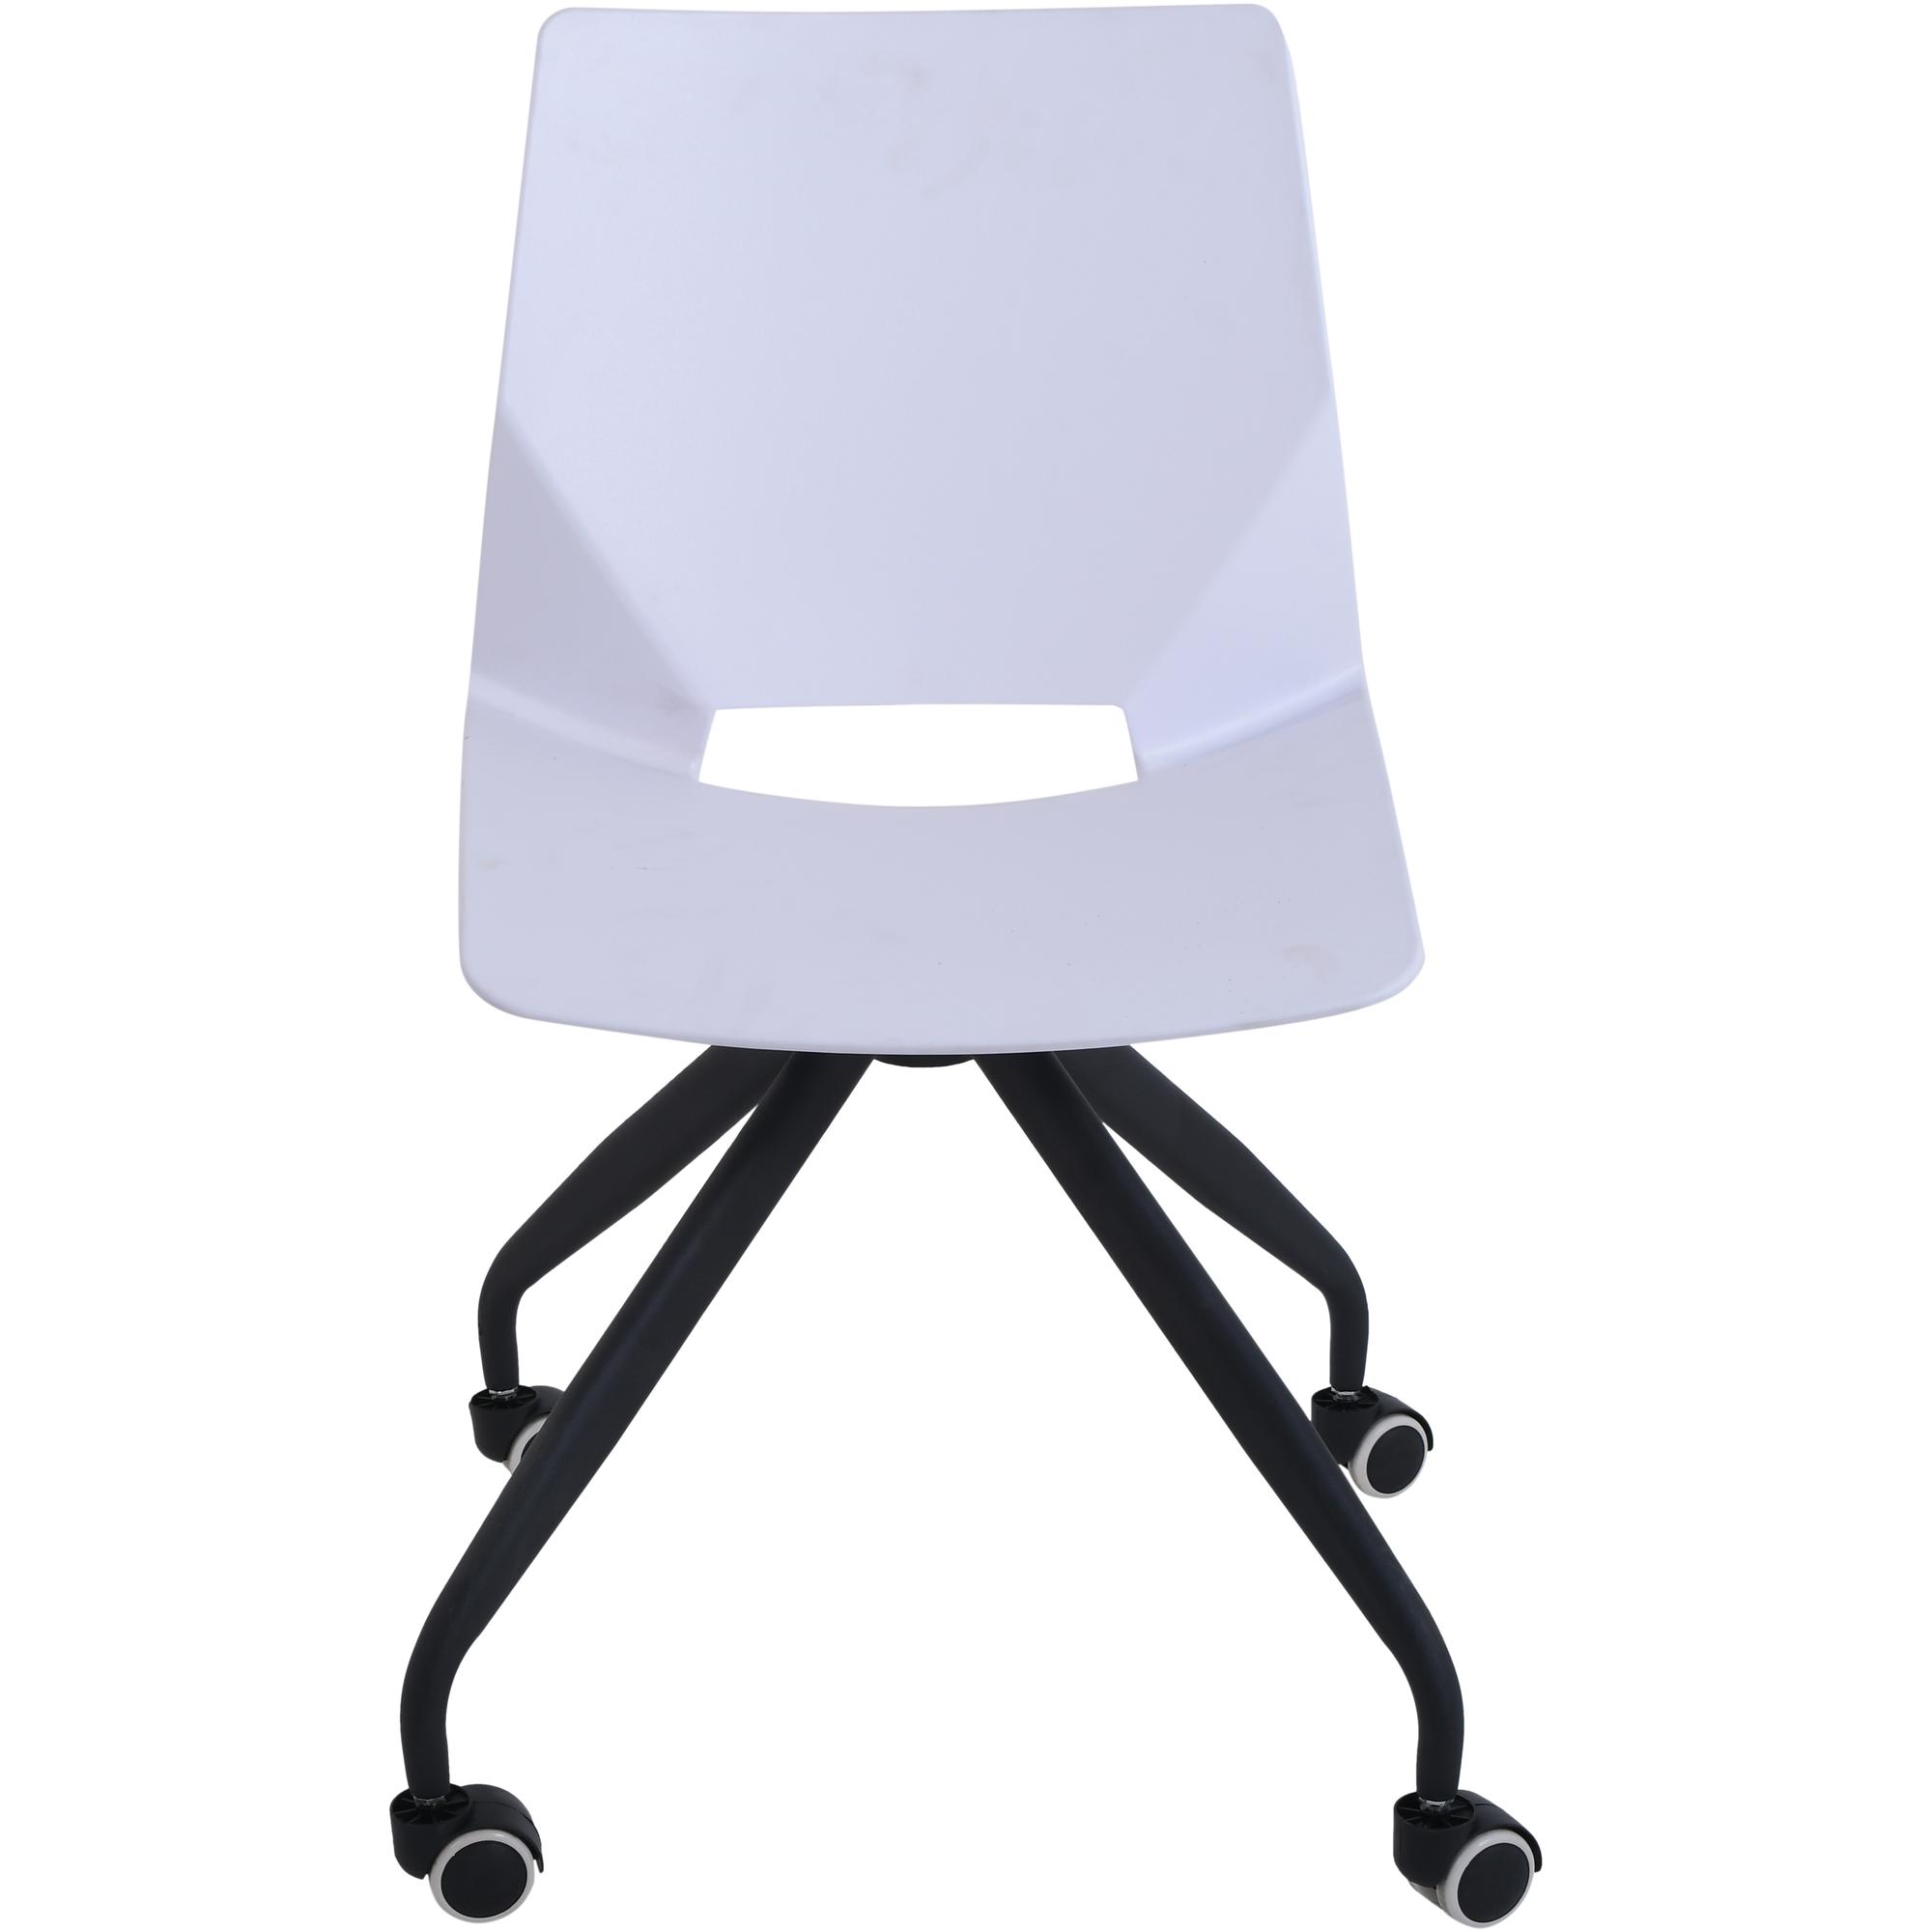 CHAIR (SEAT) OVERALL SIZE: - 422-280026AB